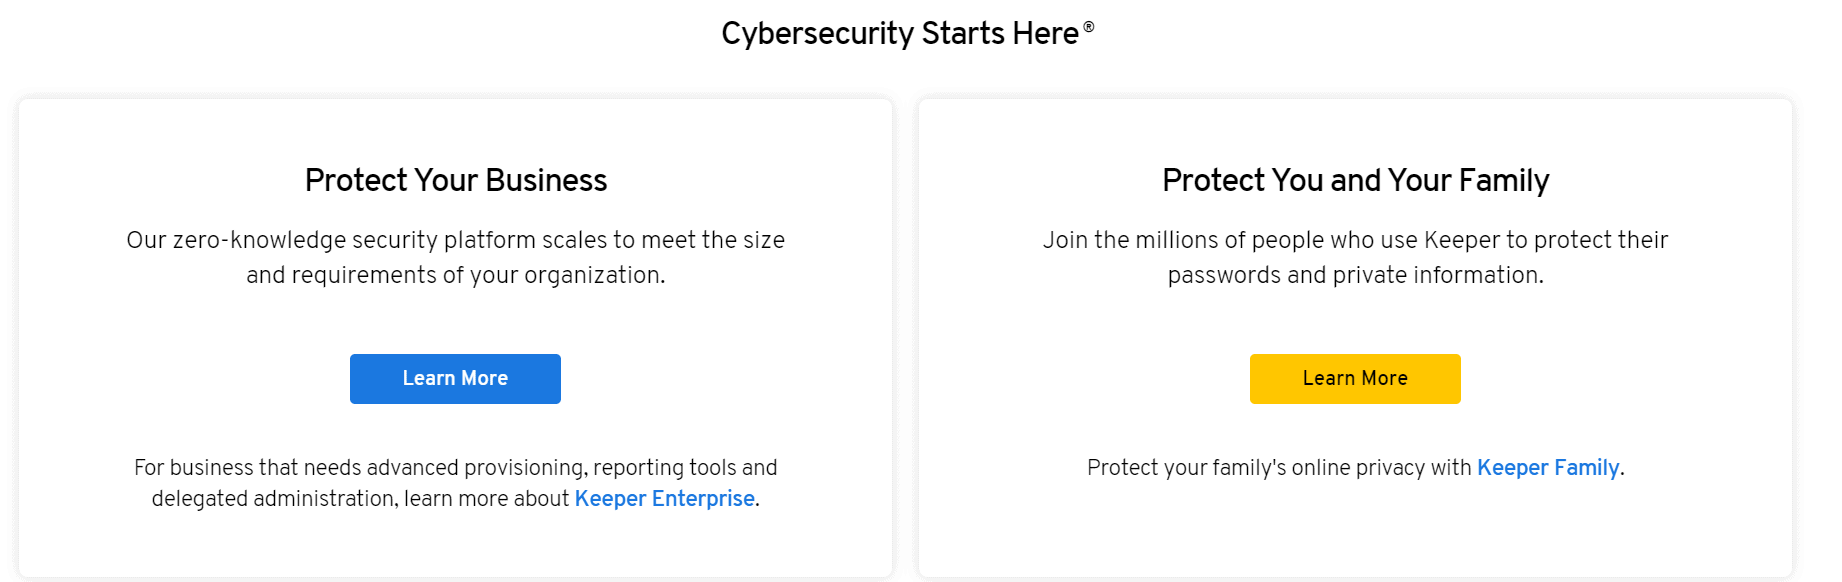 Cybersecurity Starts Here